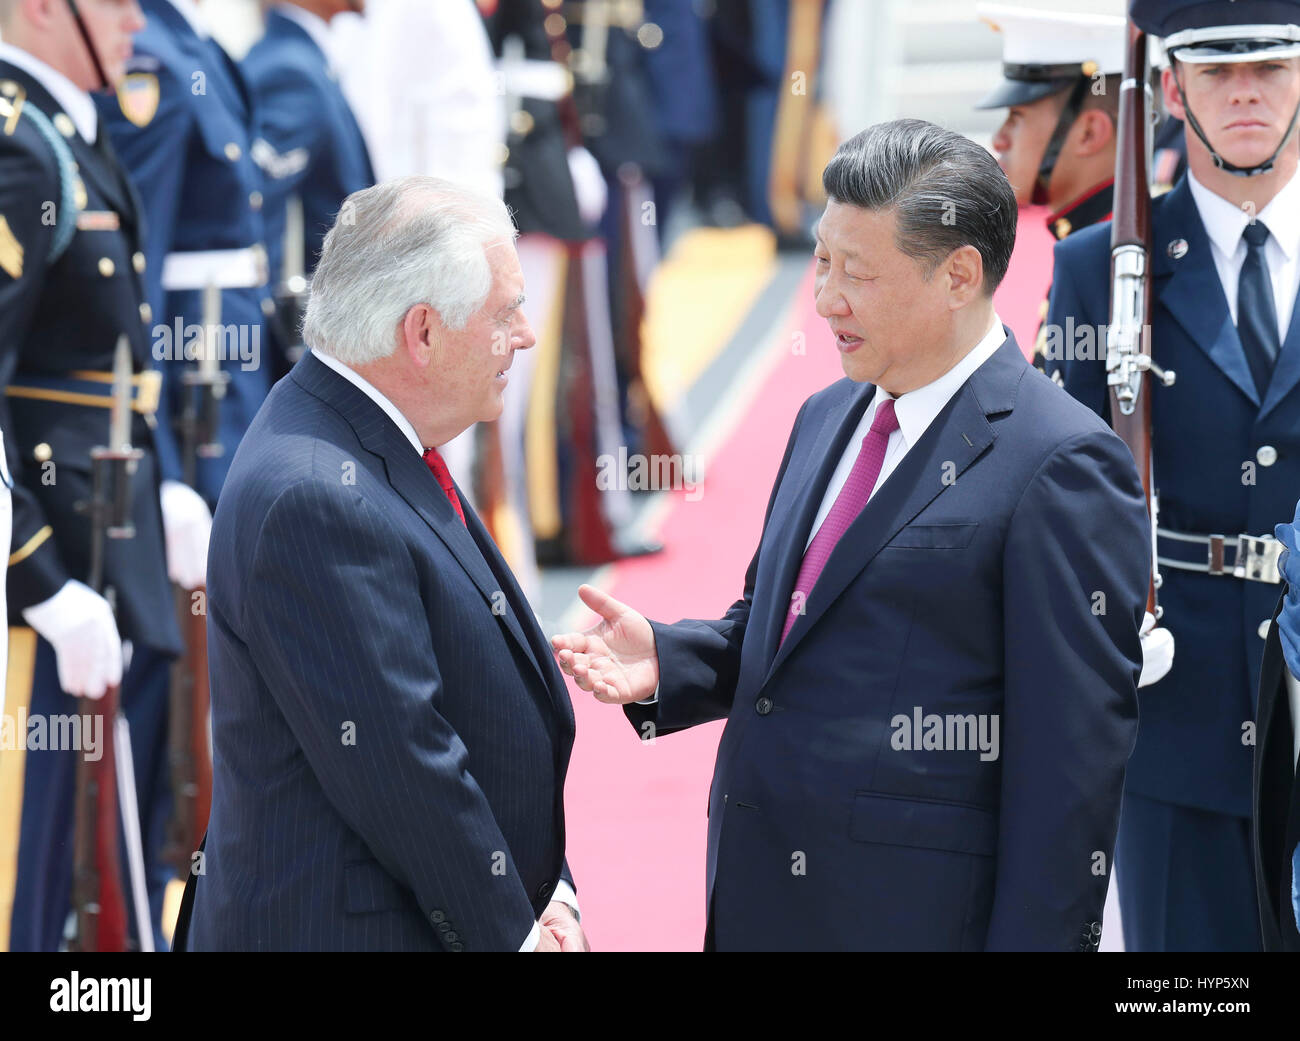 Palm Beach, USA. 6th Apr, 2017. Chinese President Xi Jinping and his wife Peng Liyuan are welcomed by U.S. Secretary of State Rex Tillerson and his wife upon their arrival at Palm Beach International Airport in Florida, the United States, April 6, 2017. Xi arrived here for the first meeting with U.S. President Donald Trump. Credit: Ding Lin/Xinhua/Alamy Live News Stock Photo